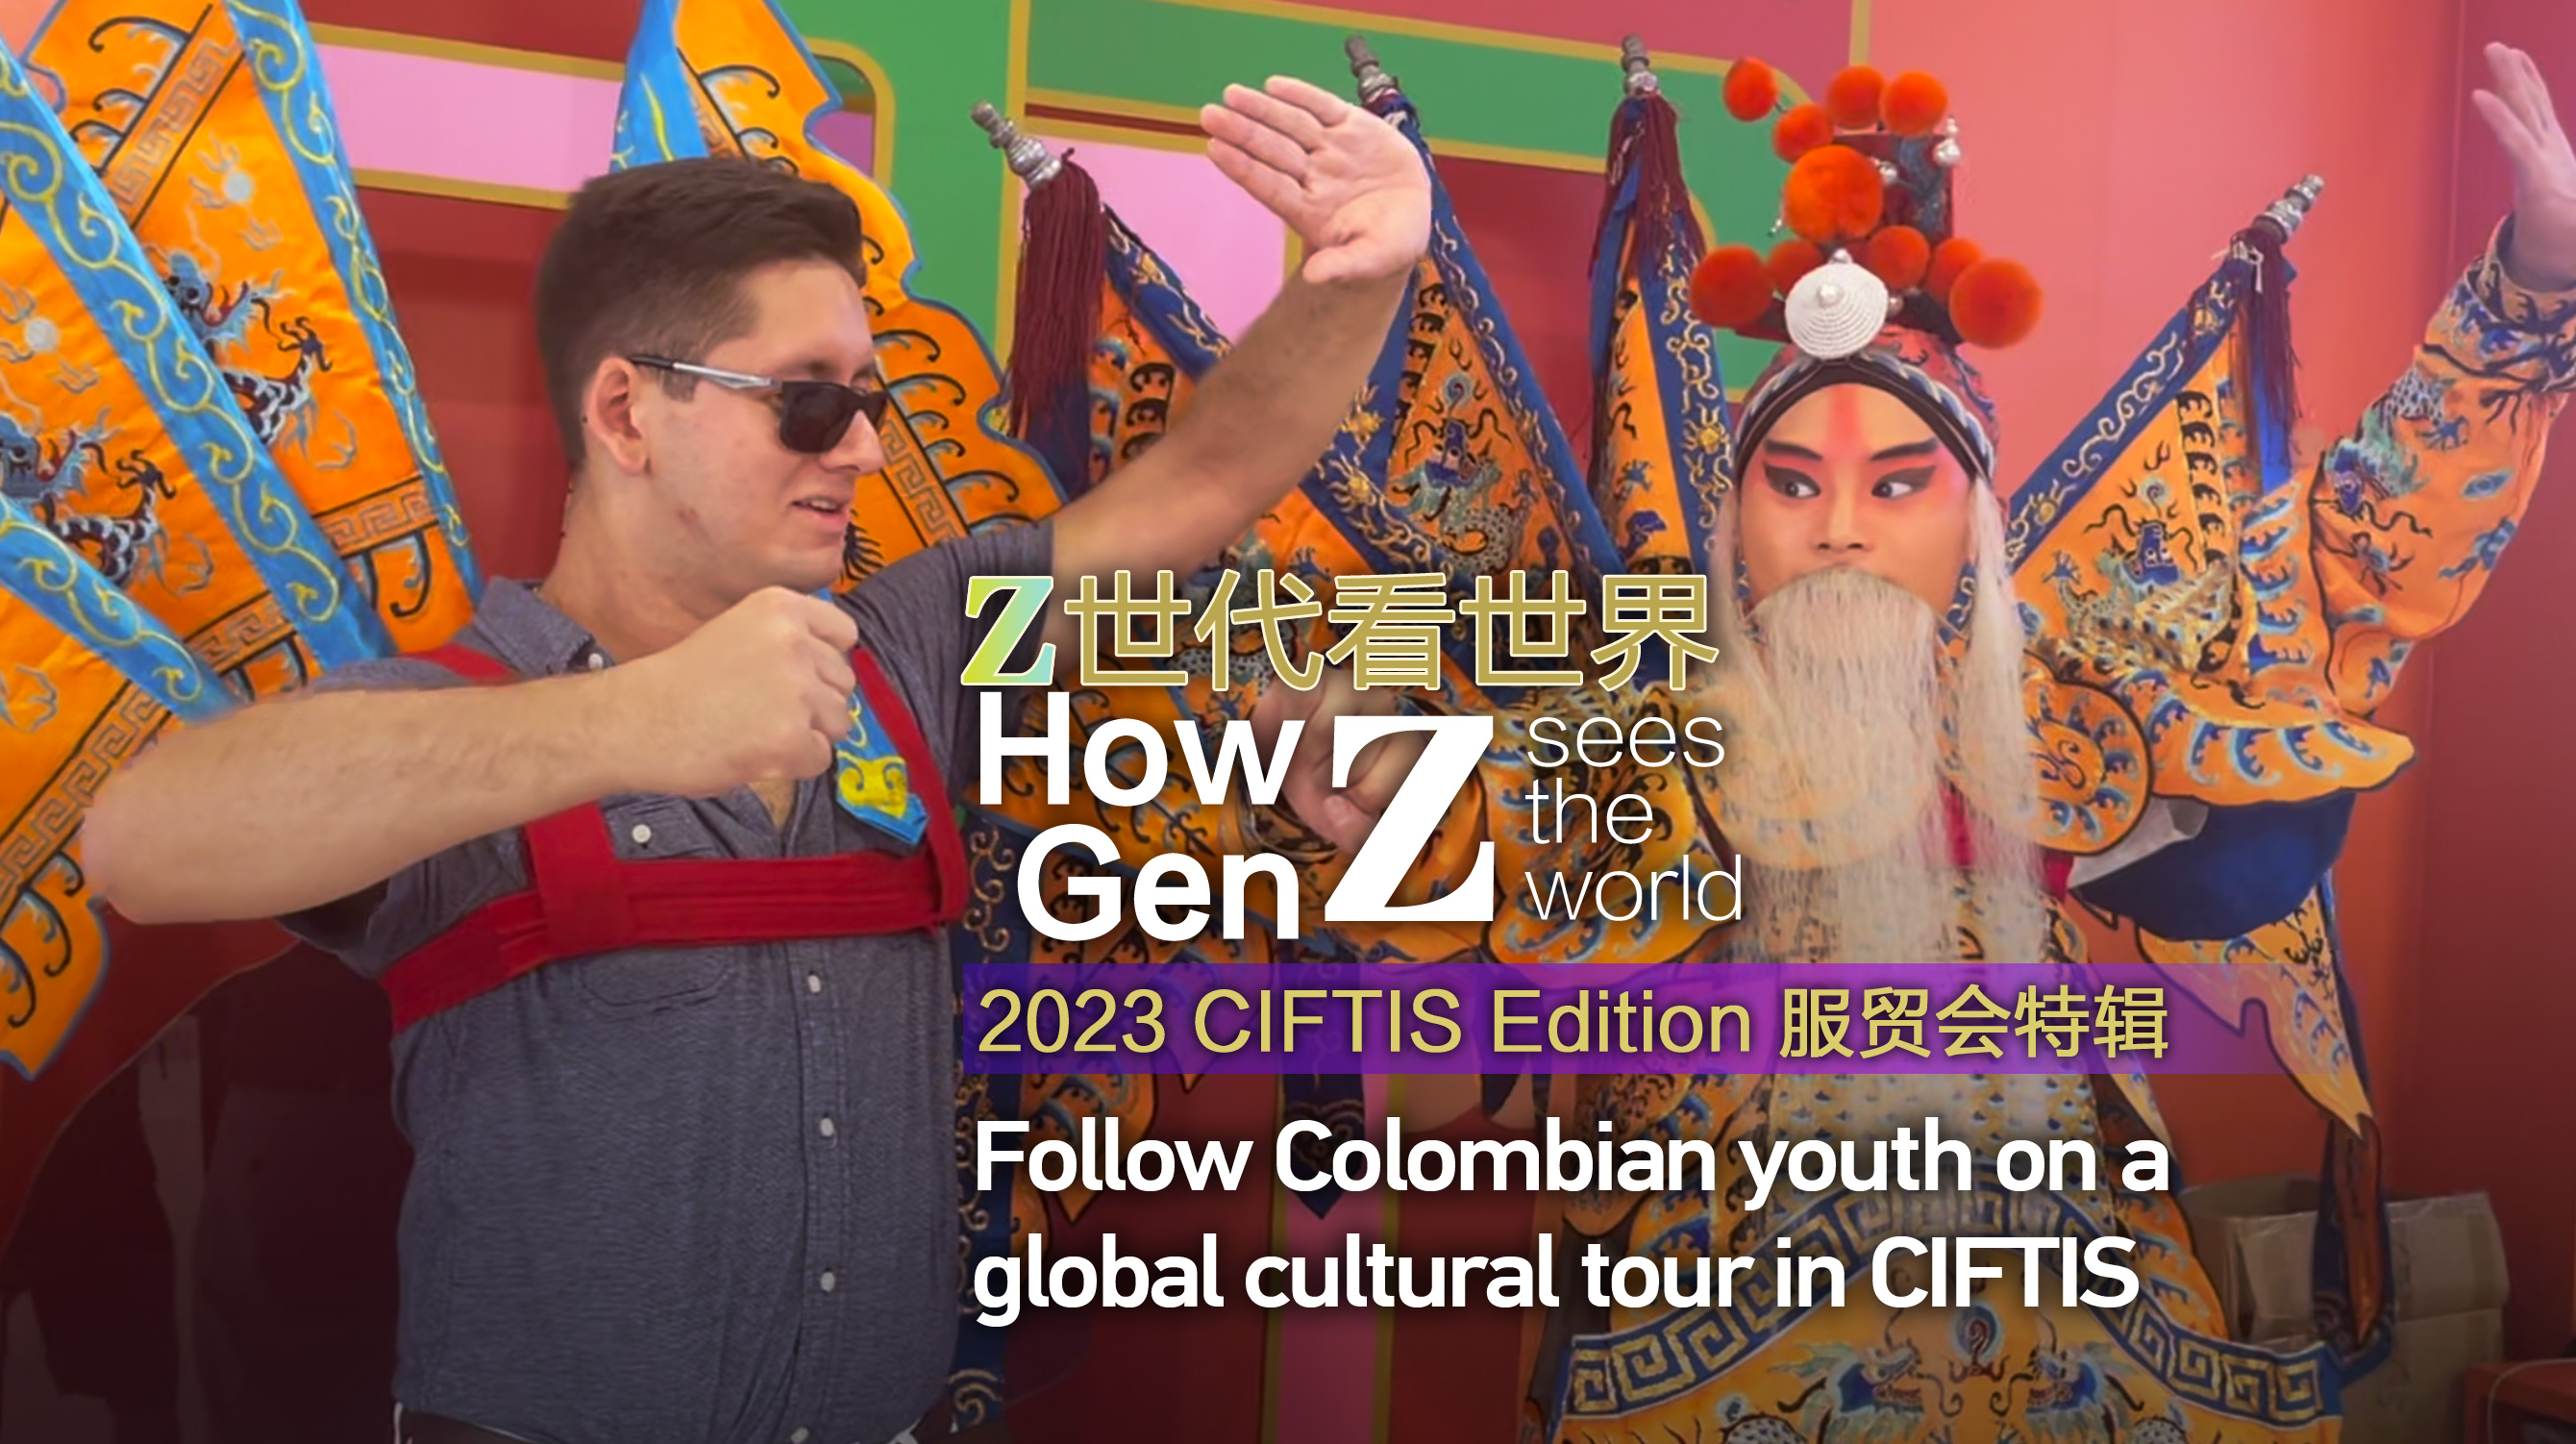 Follow Colombian youth on a global cultural tour at CIFTIS